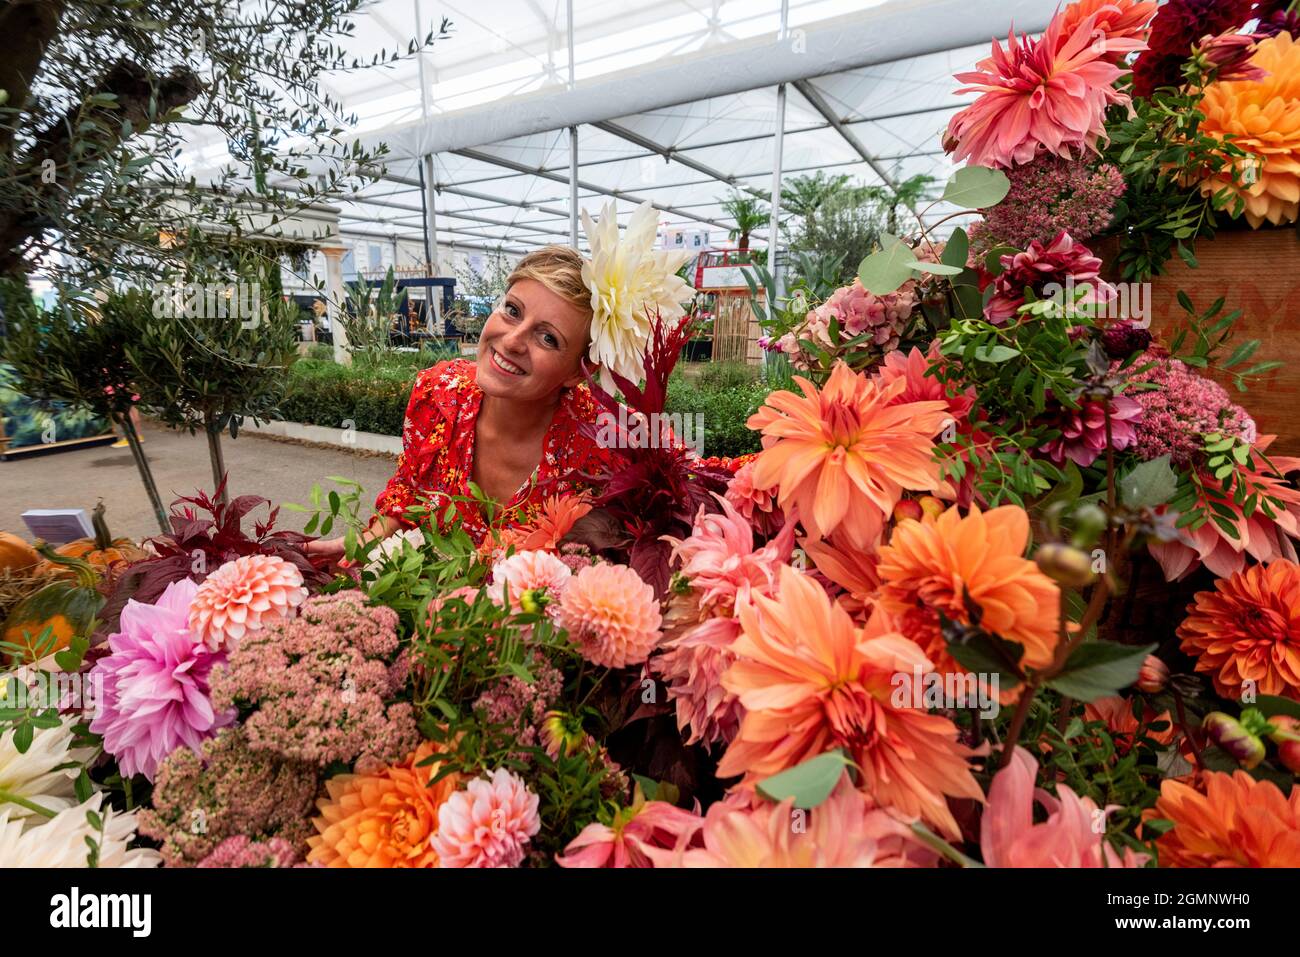 London, UK.  20 September 2021. Andie McDowell poses with her dahlias at her Dahlia Beach stand at the RHS Chelsea Flower Show. Cancelled due to Covid-19 concerns last year, this is the first time that the show has been held in September (usually May).  The show runs to 26 September at the Royal Hospital Chelsea.  Credit: Stephen Chung / Alamy Live News Stock Photo